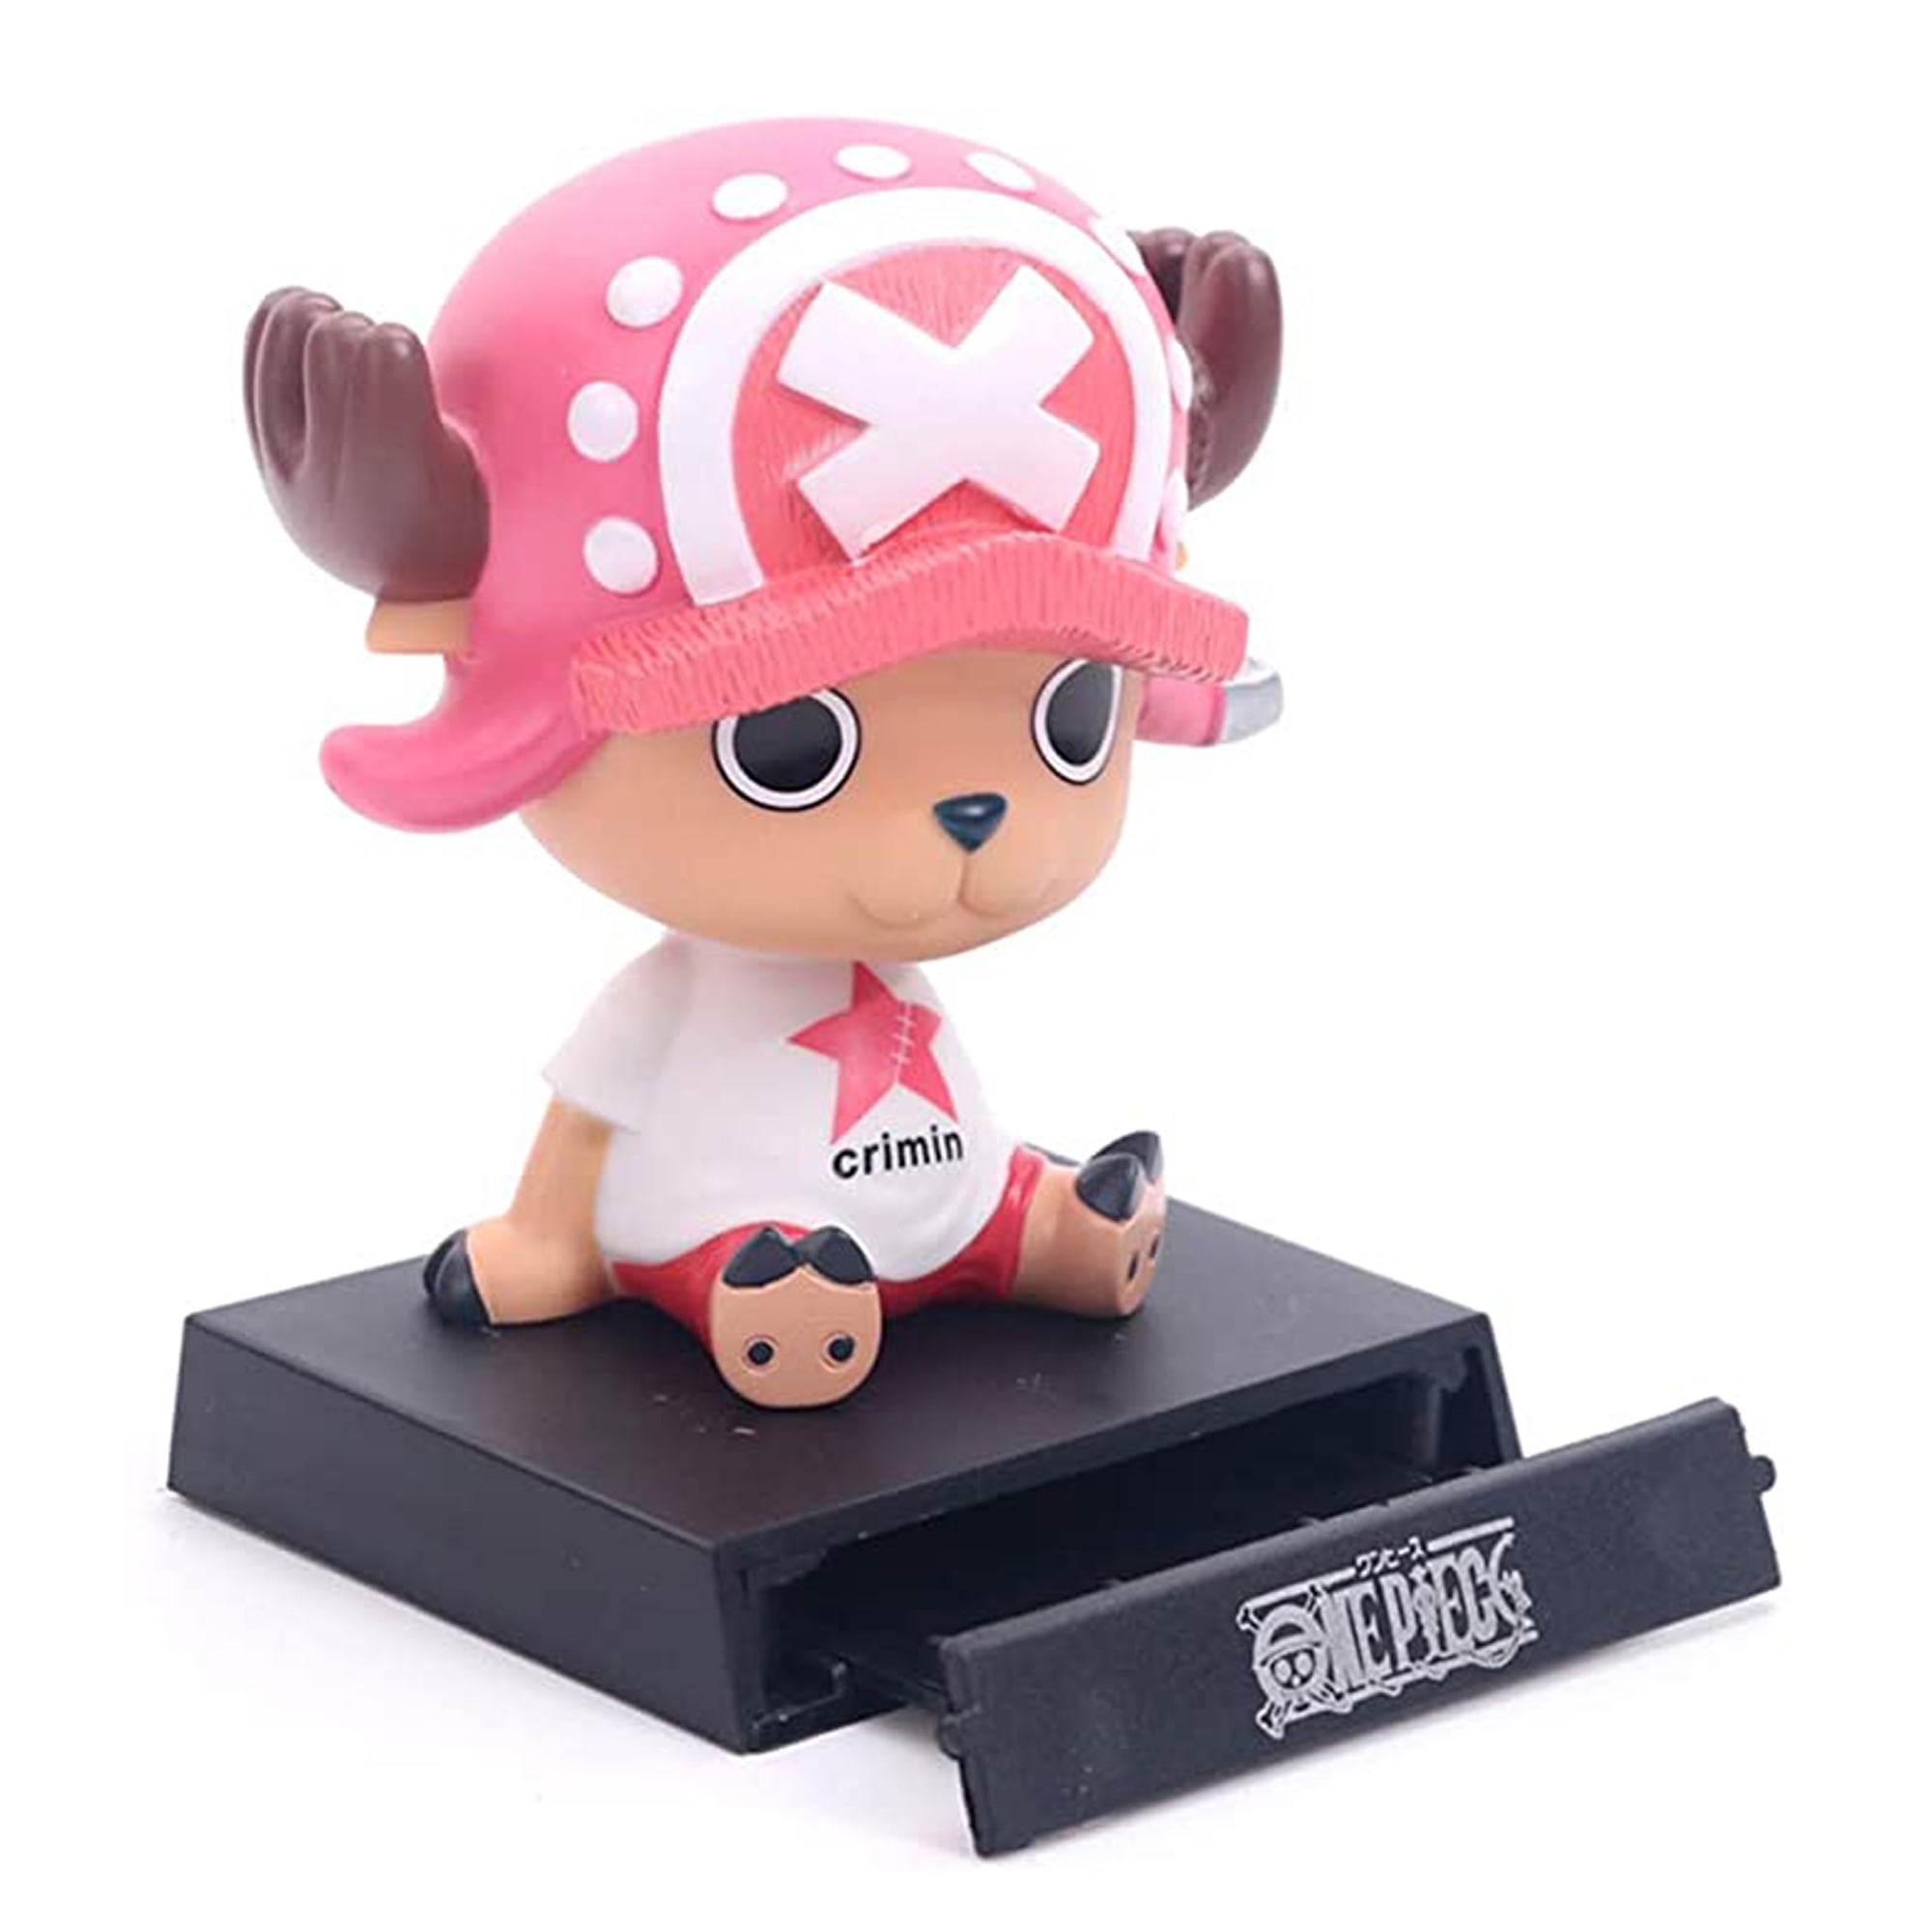 QWEIAS One Piece  Tony Chopper Action Figure Anime Statues Action Character 3D Model Toy Dolls Desktop Decorations Collectibles Home Car Dashboard Gift Games Cool D-10CM